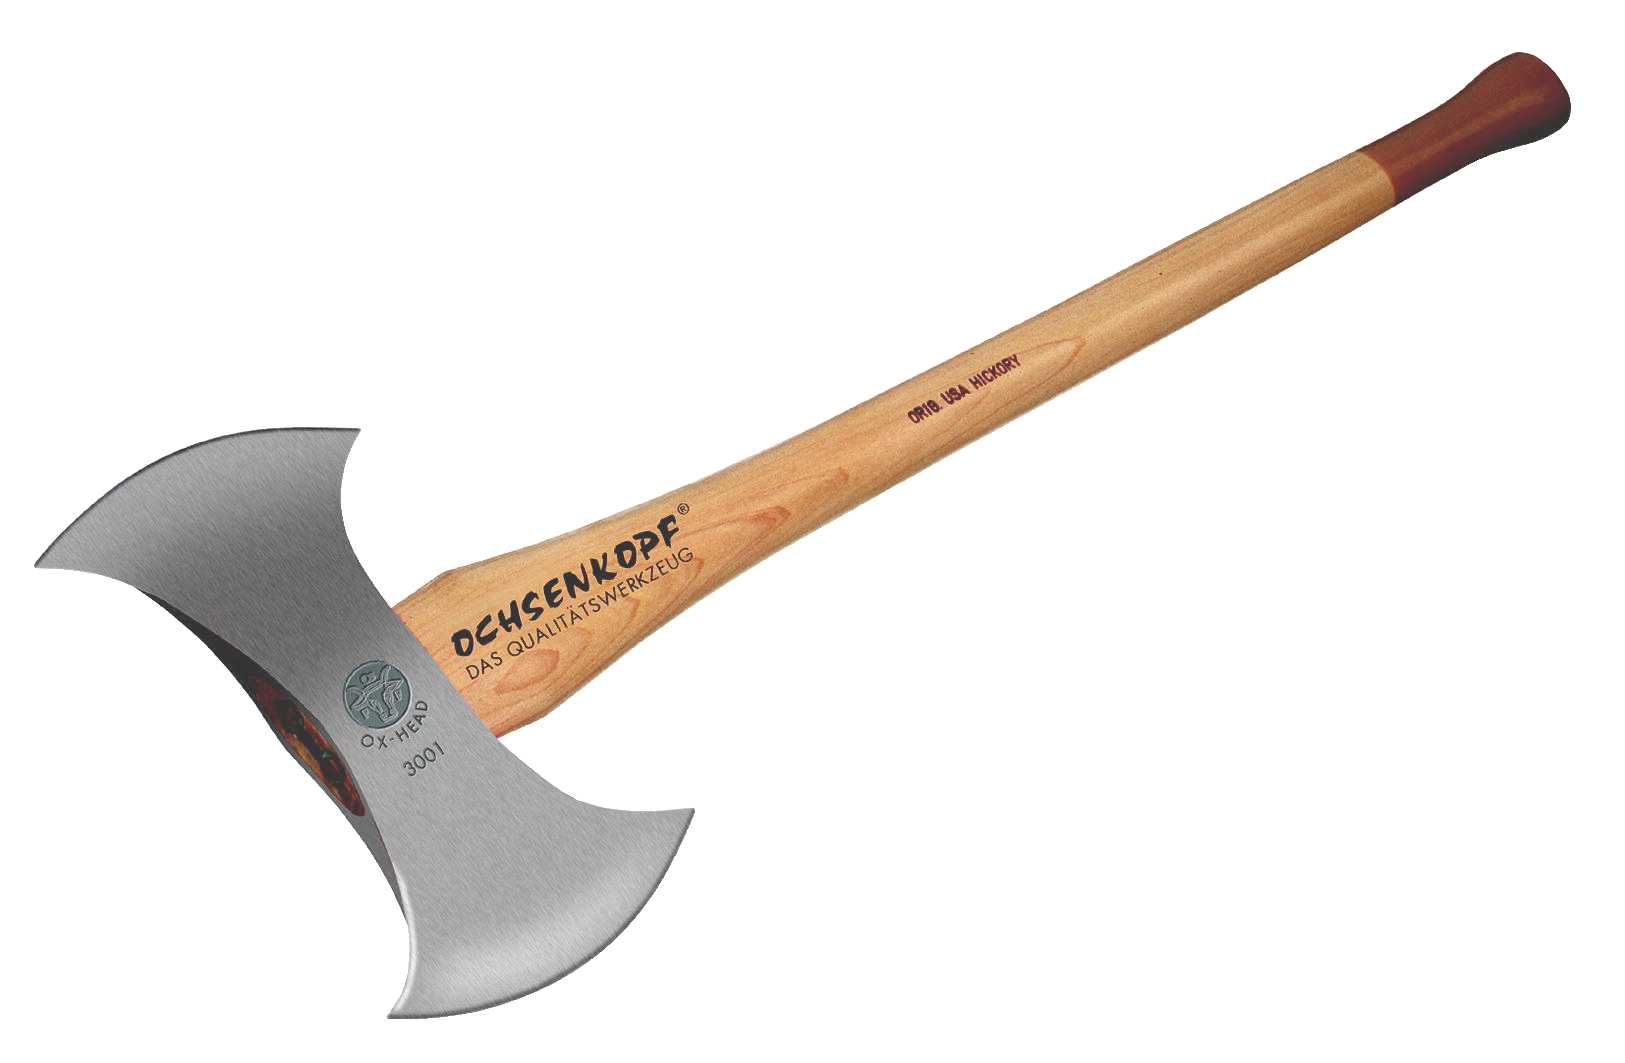 How to Build Wood Axe PDF Plans